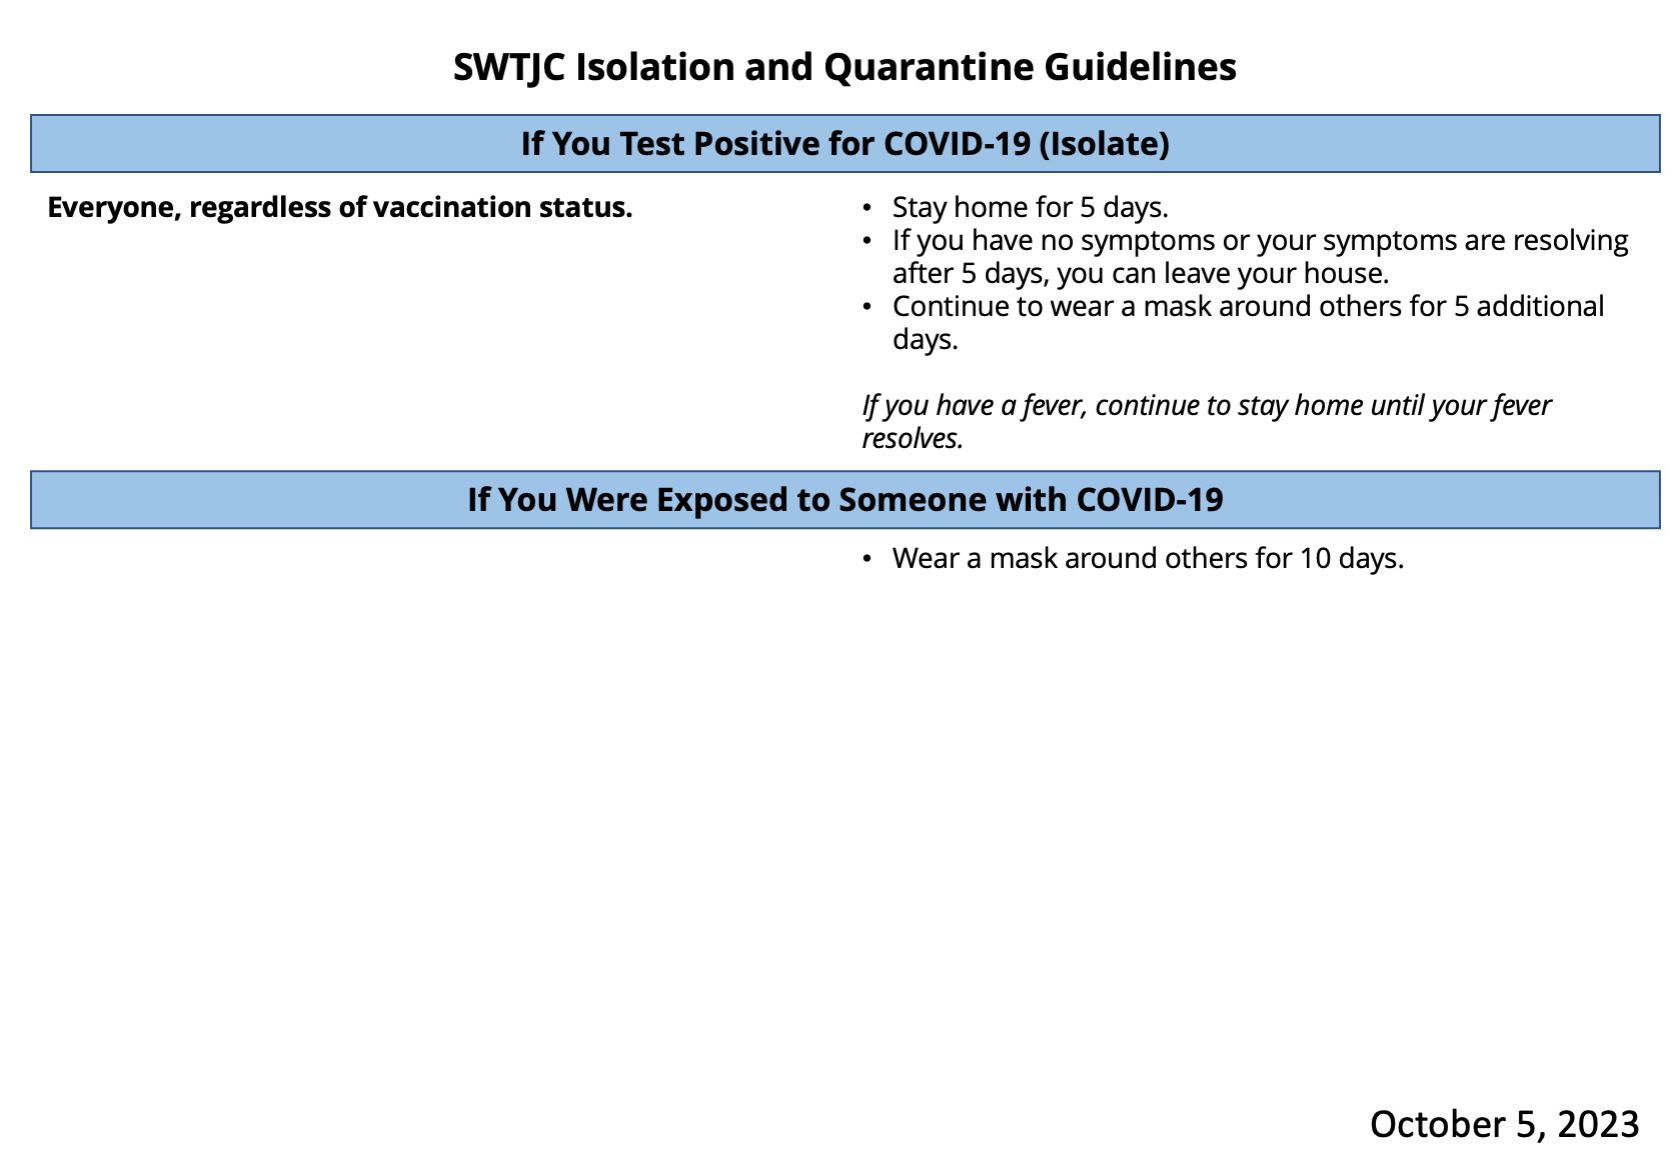 SWTJC Isolation and Quarantine Guidelines